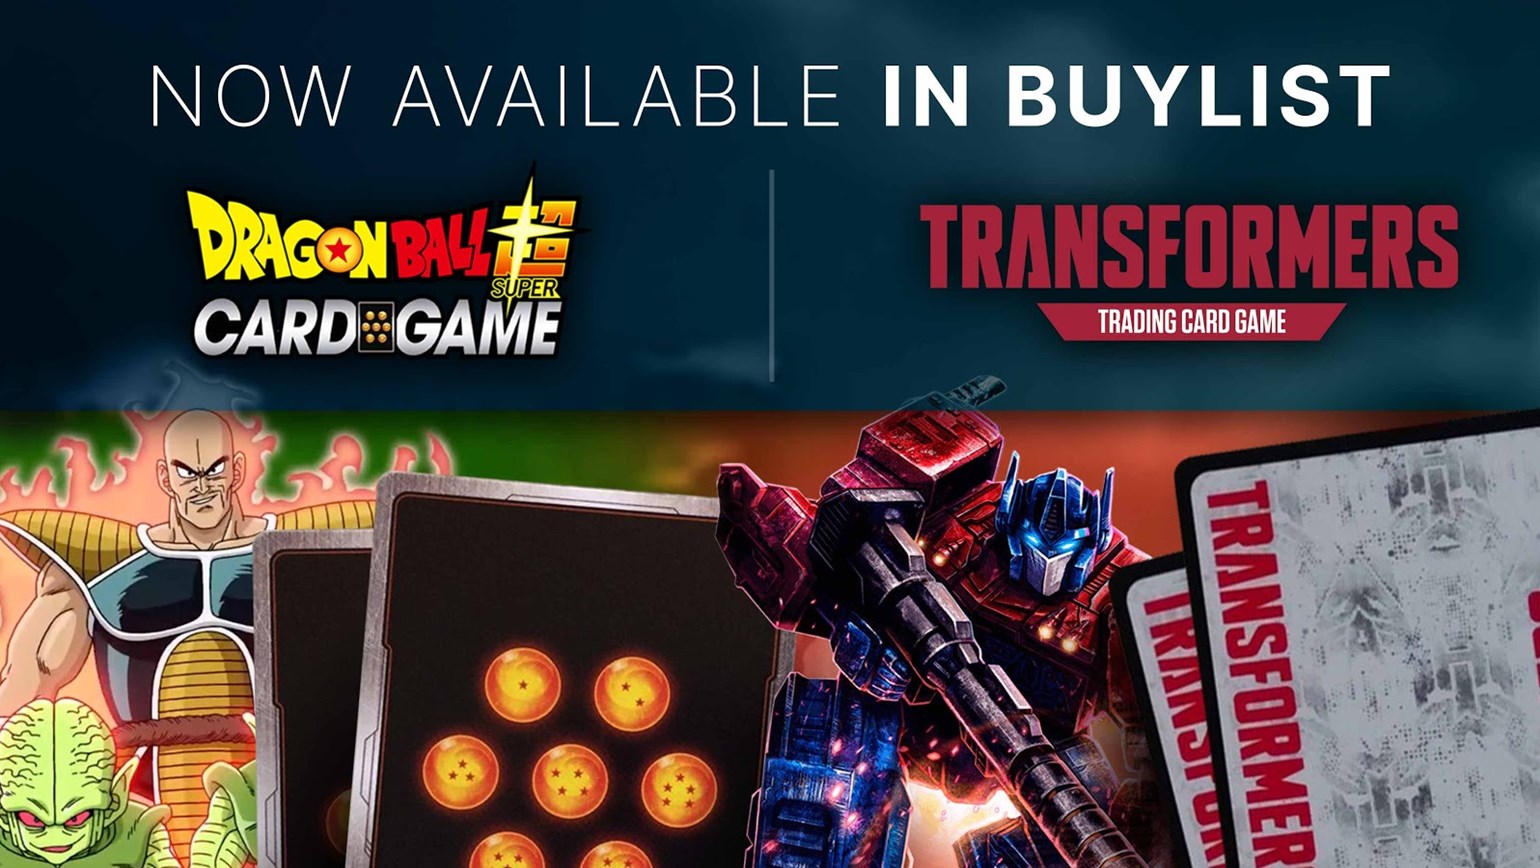 Transformers and Dragon Ball Super Join the Pro Buylist